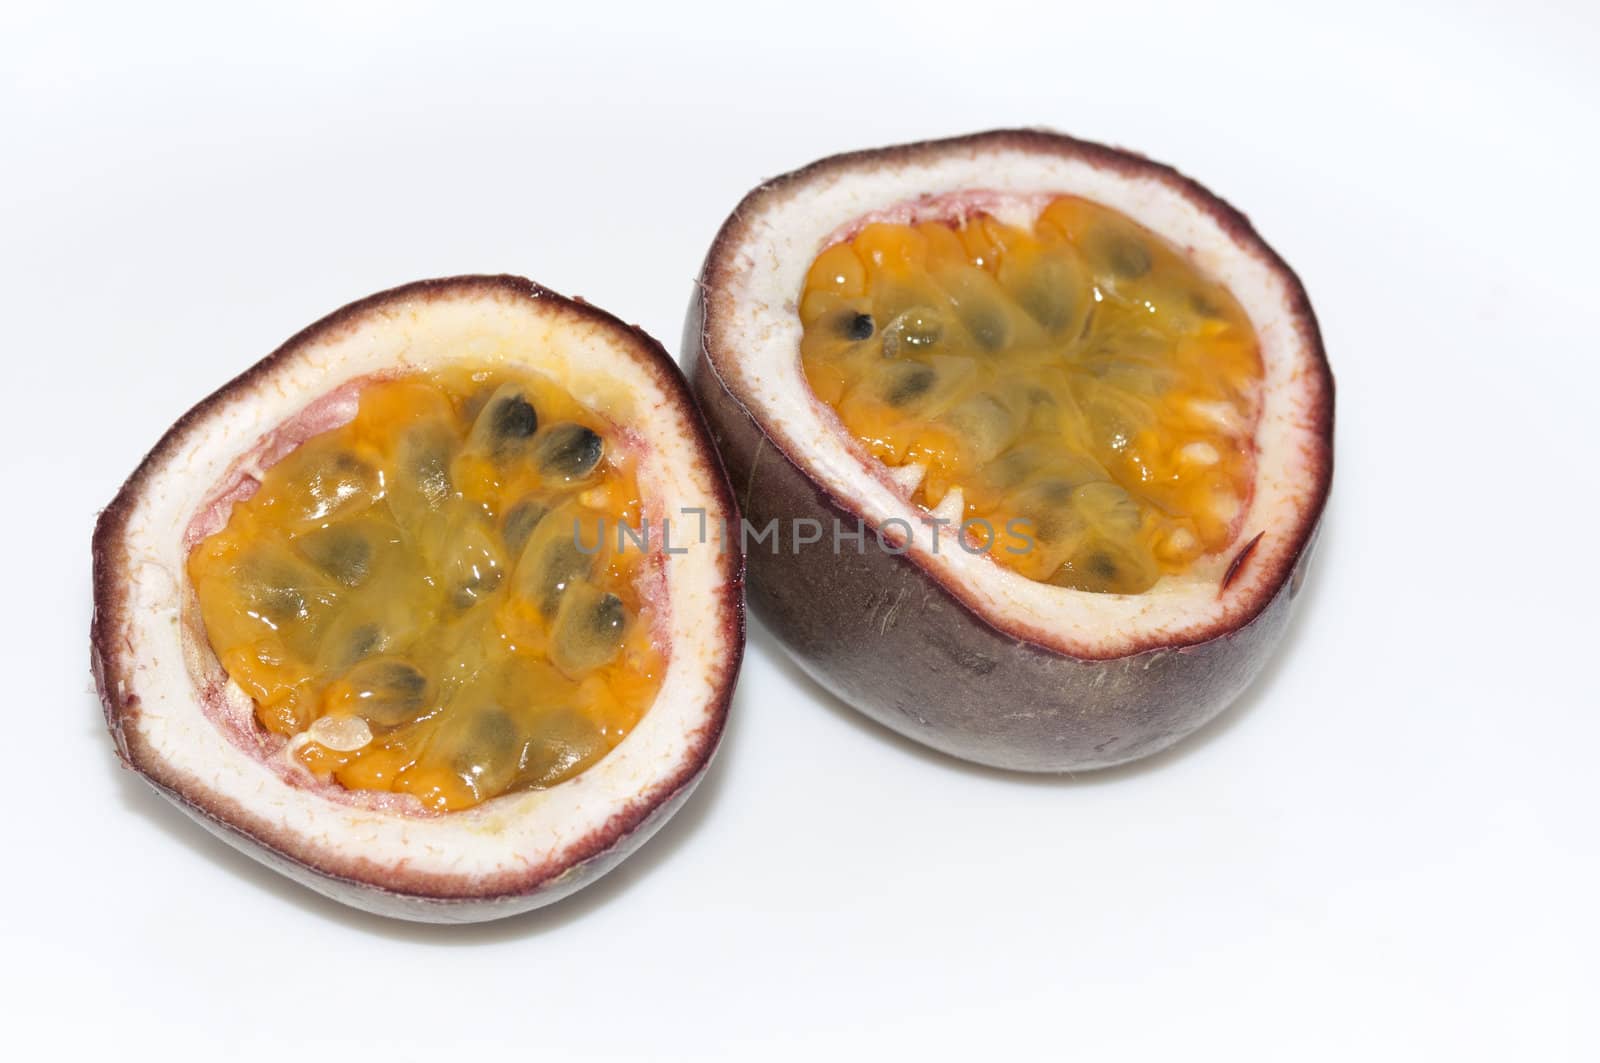 cut passion fruit on white background